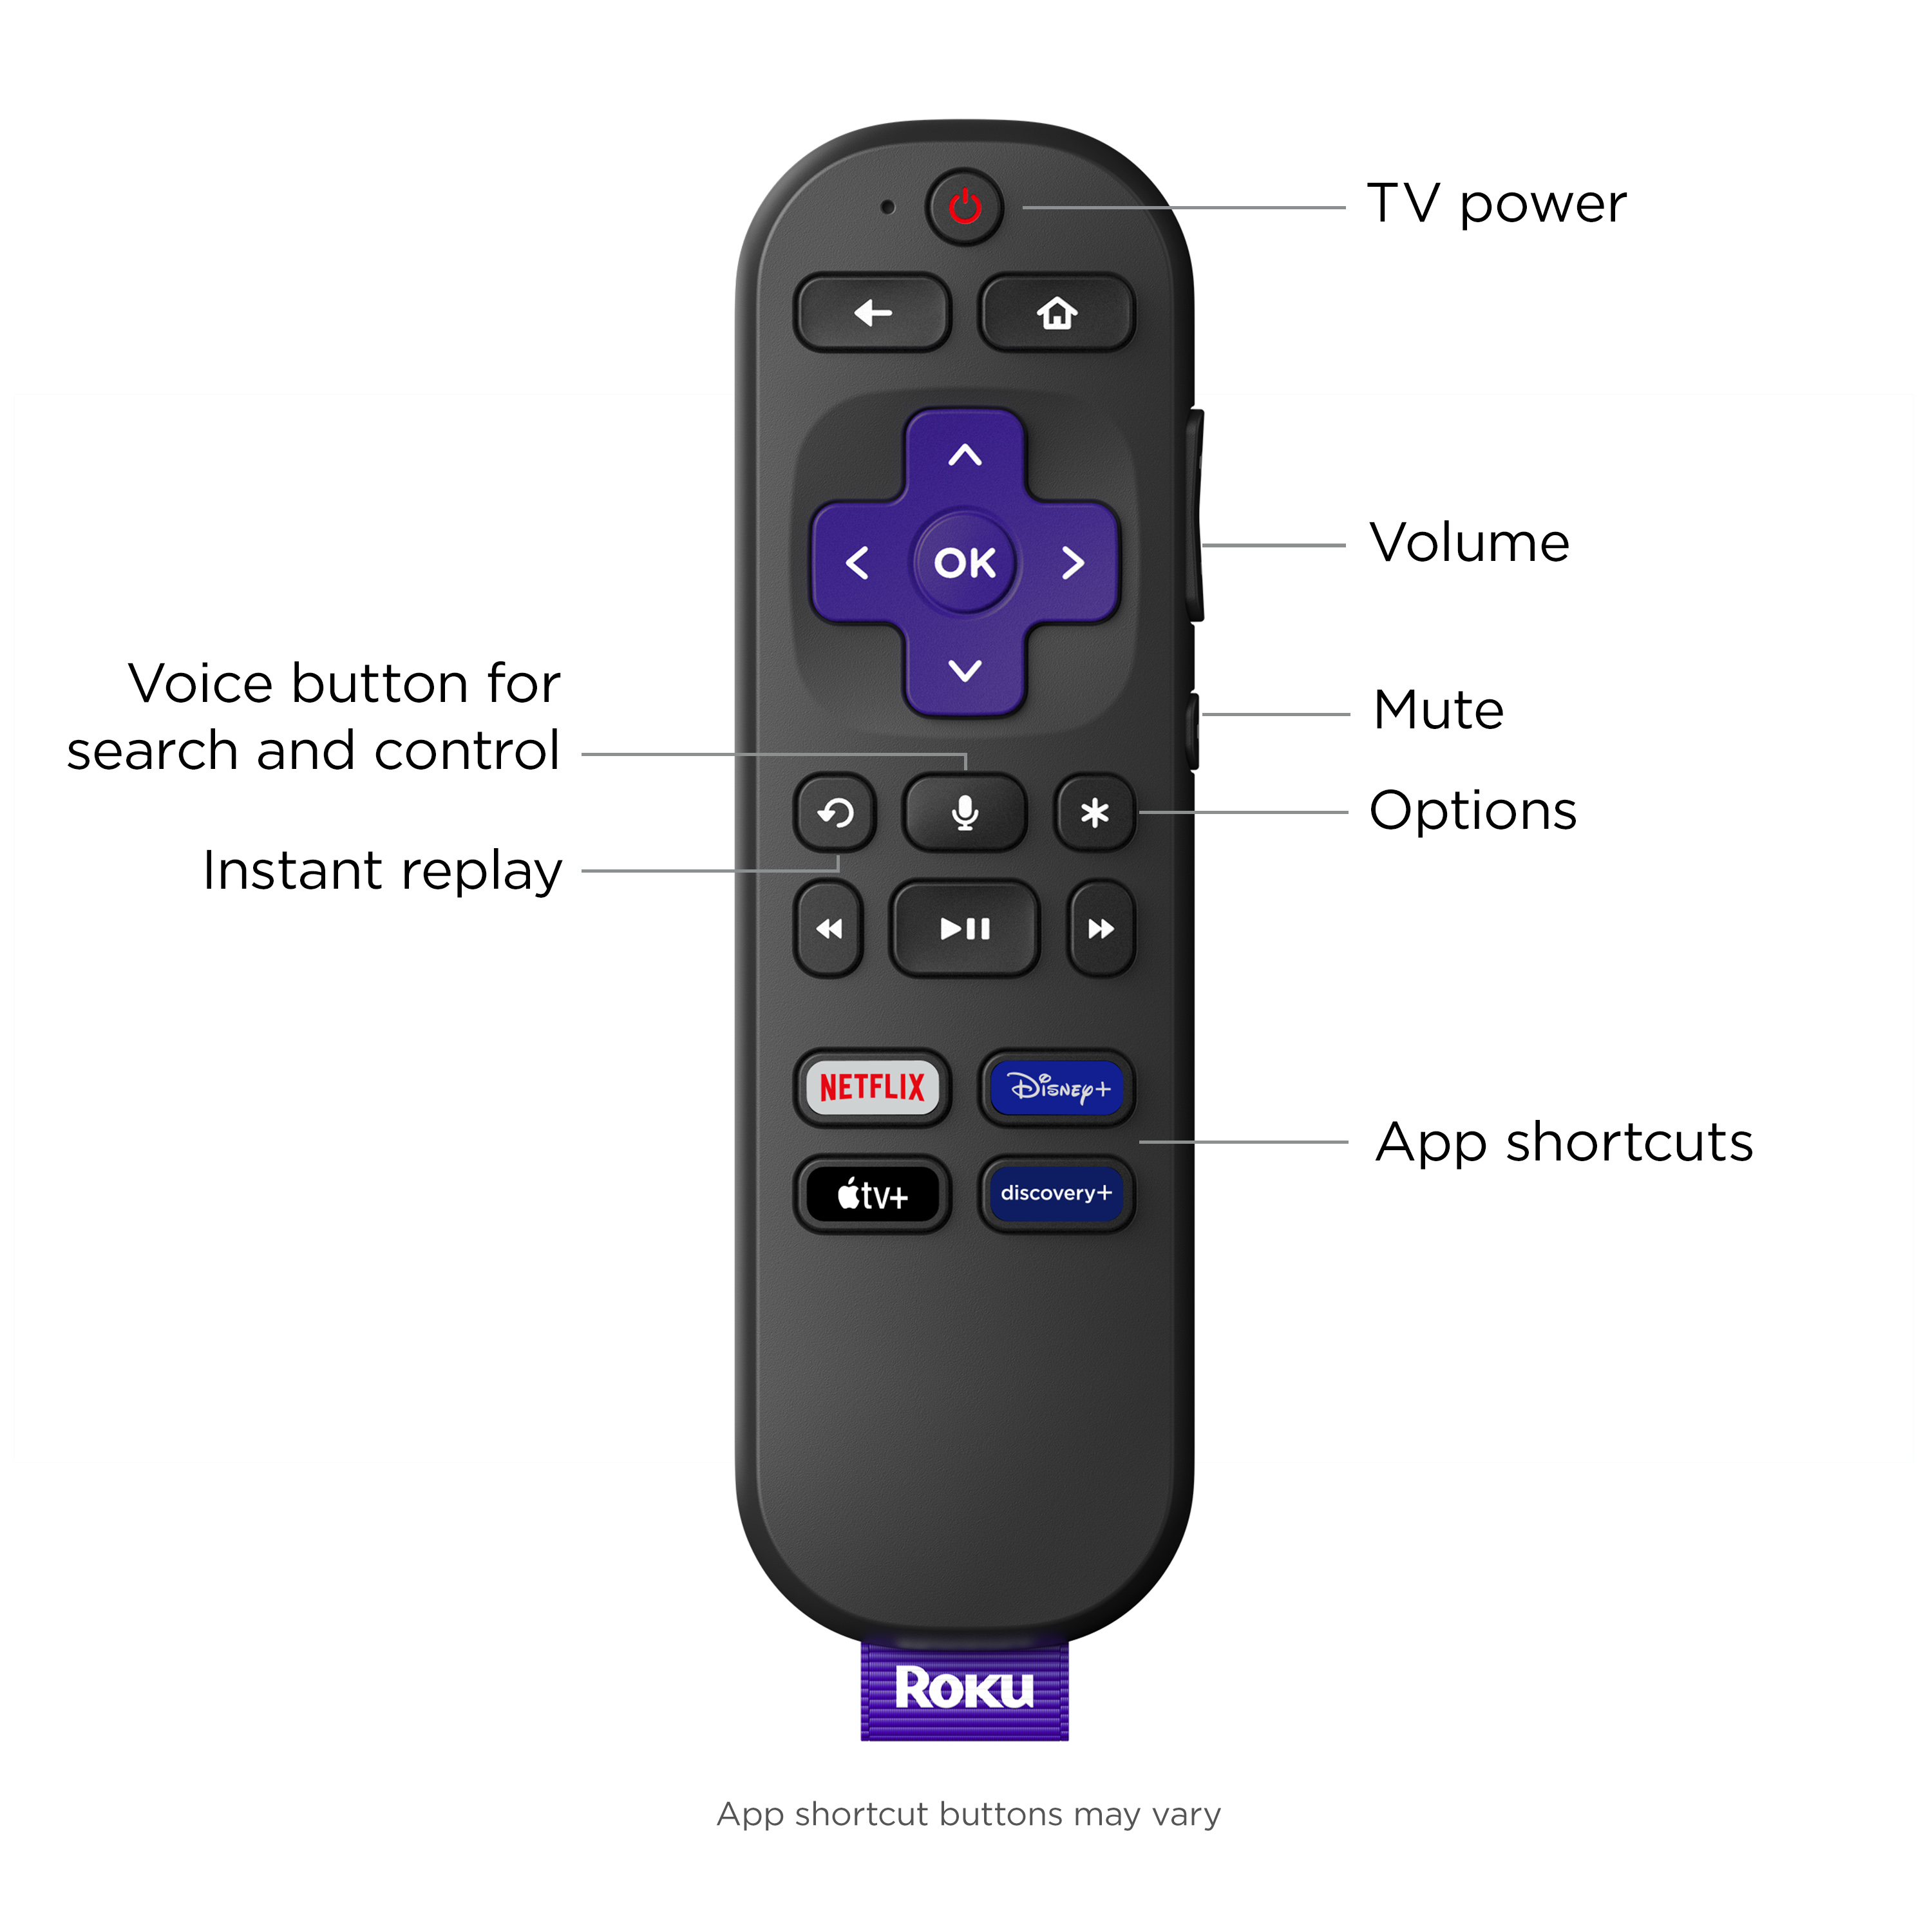 Roku Streaming Stick 4K | Streaming Device 4K/HDR/Dolby Vision with Voice Remote with TV Controls and Long-Range Wi-Fi - image 5 of 12